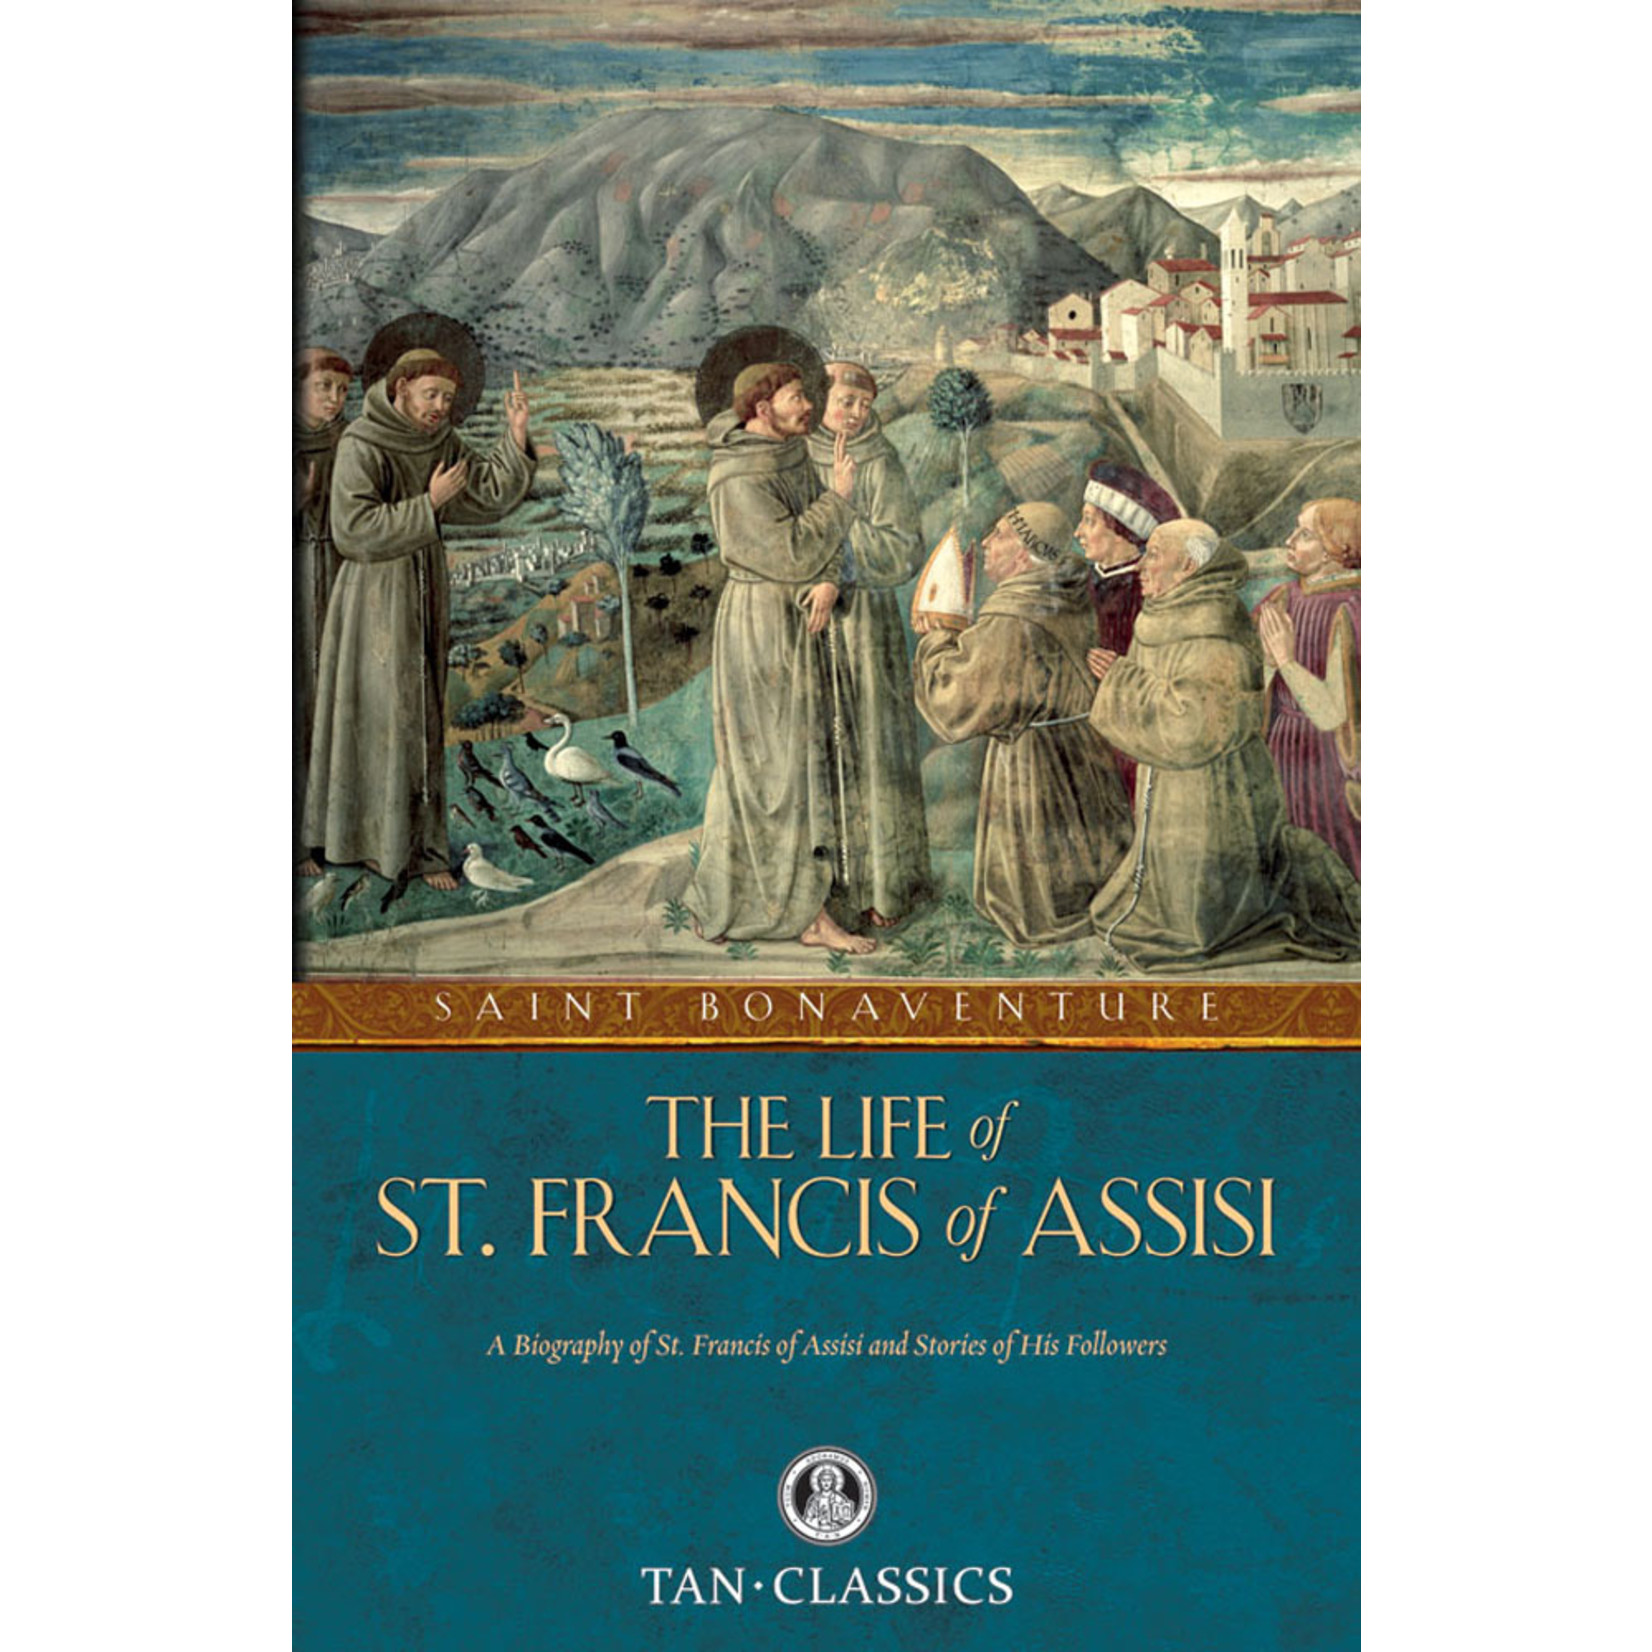 The Life of St Francis of Assisi